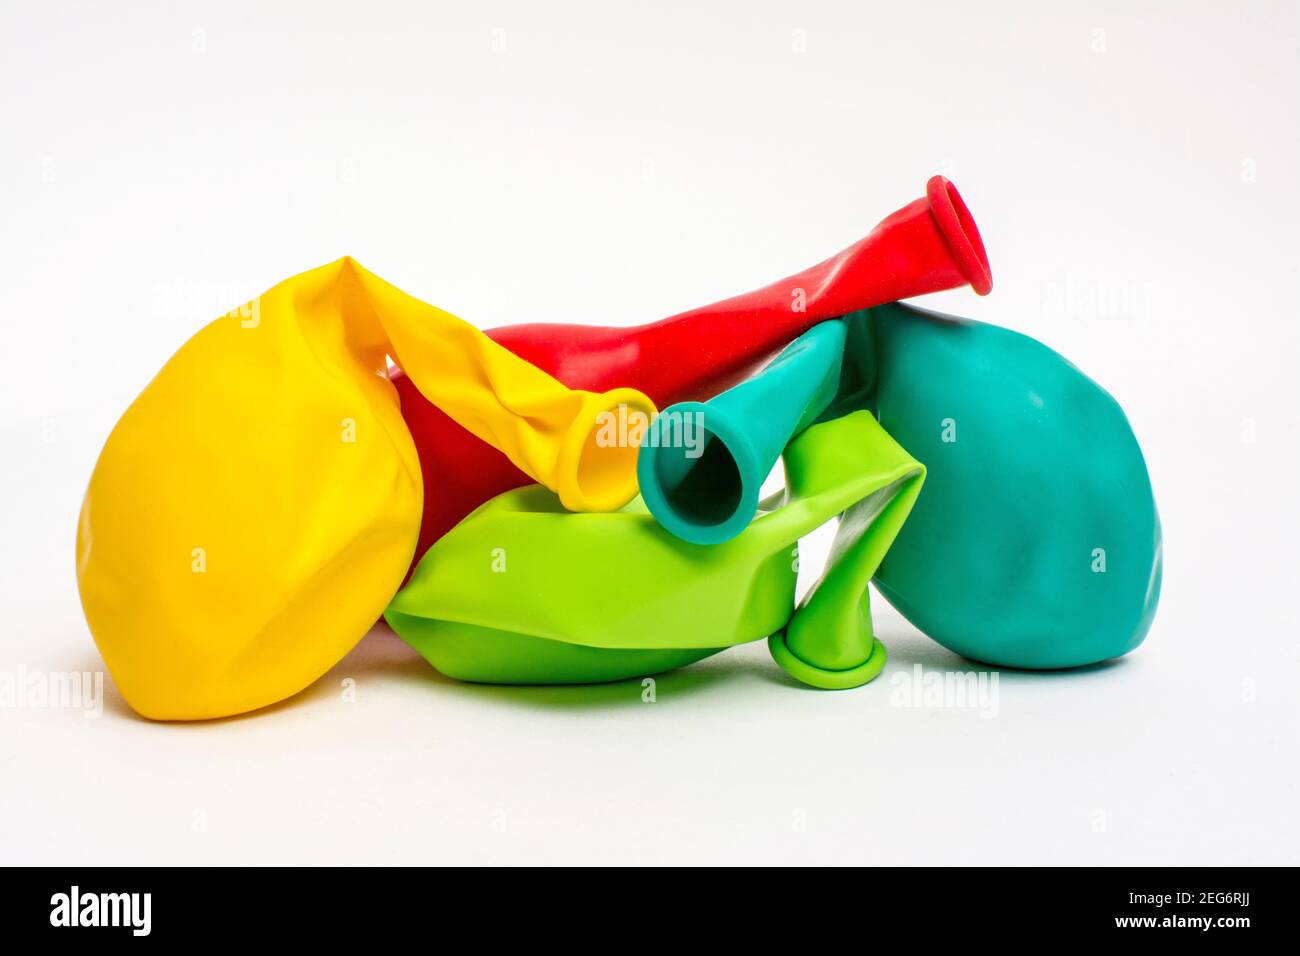 Multicolored balloons on white background, France Stock Photo